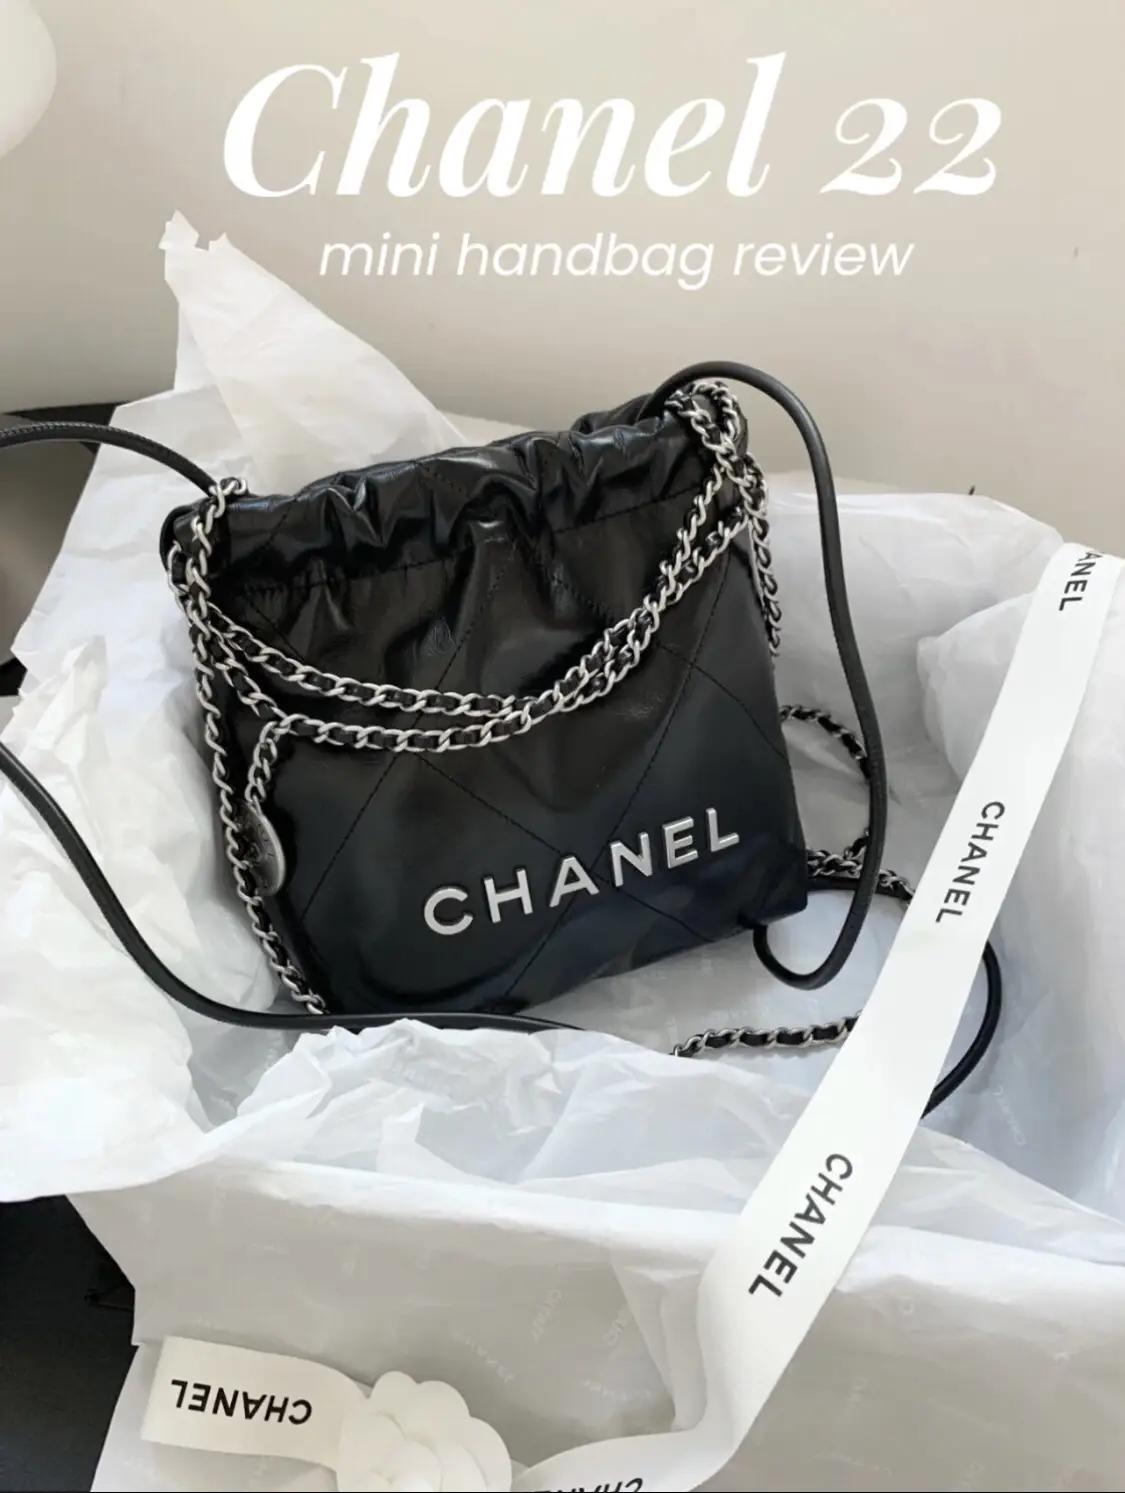 CHANEL 22 MINI HANDBAG REVIEW, Gallery posted by Avianna Astrid